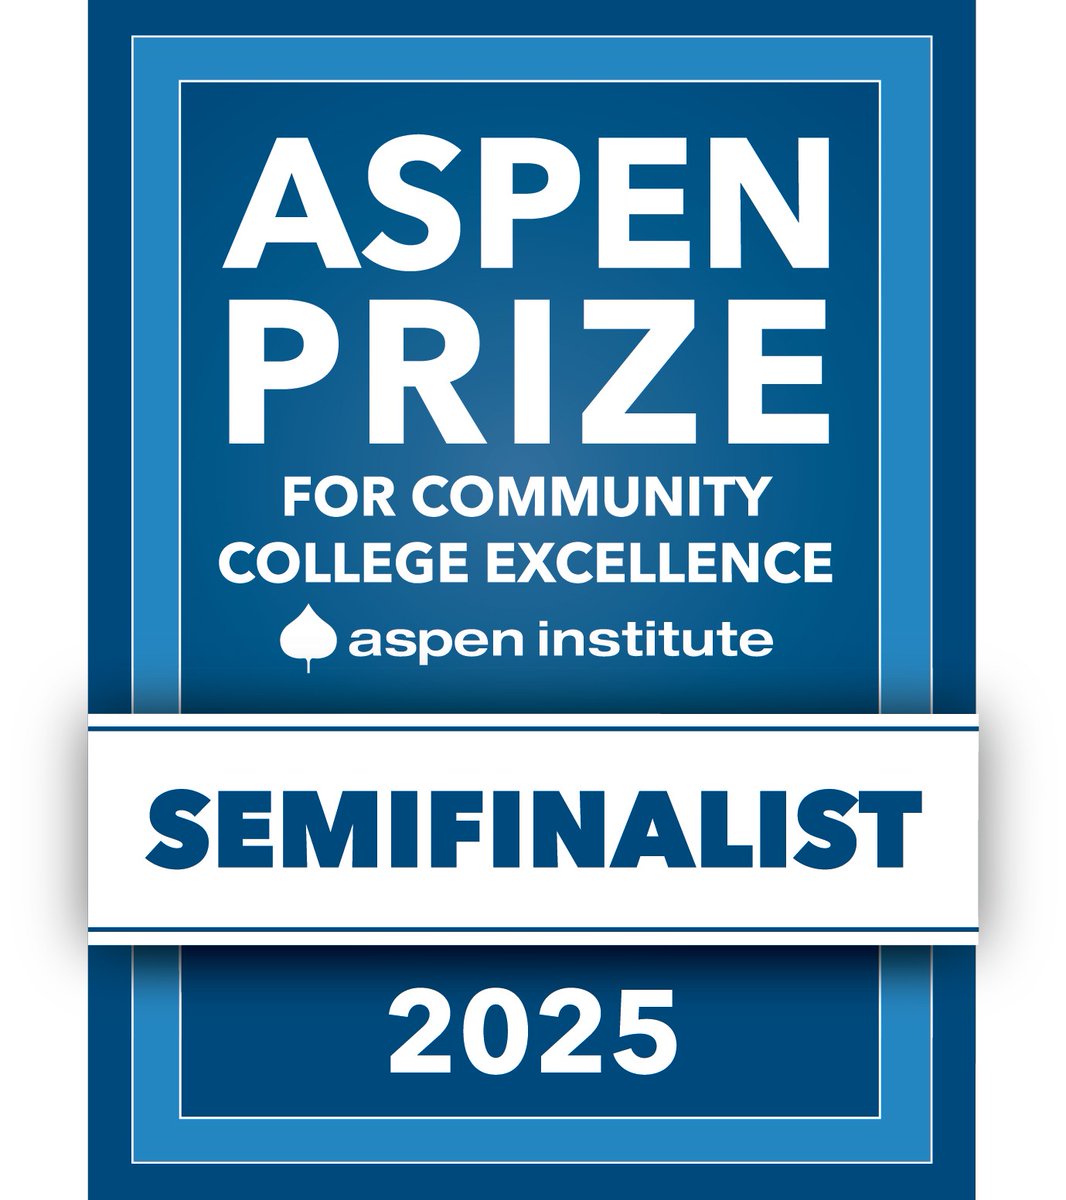 GHC has been named an Aspen Prize Semifinalist by the Aspen Institute College Excellence Program. Read more at highlands.edu @AspenHigherEd #AspenPrize